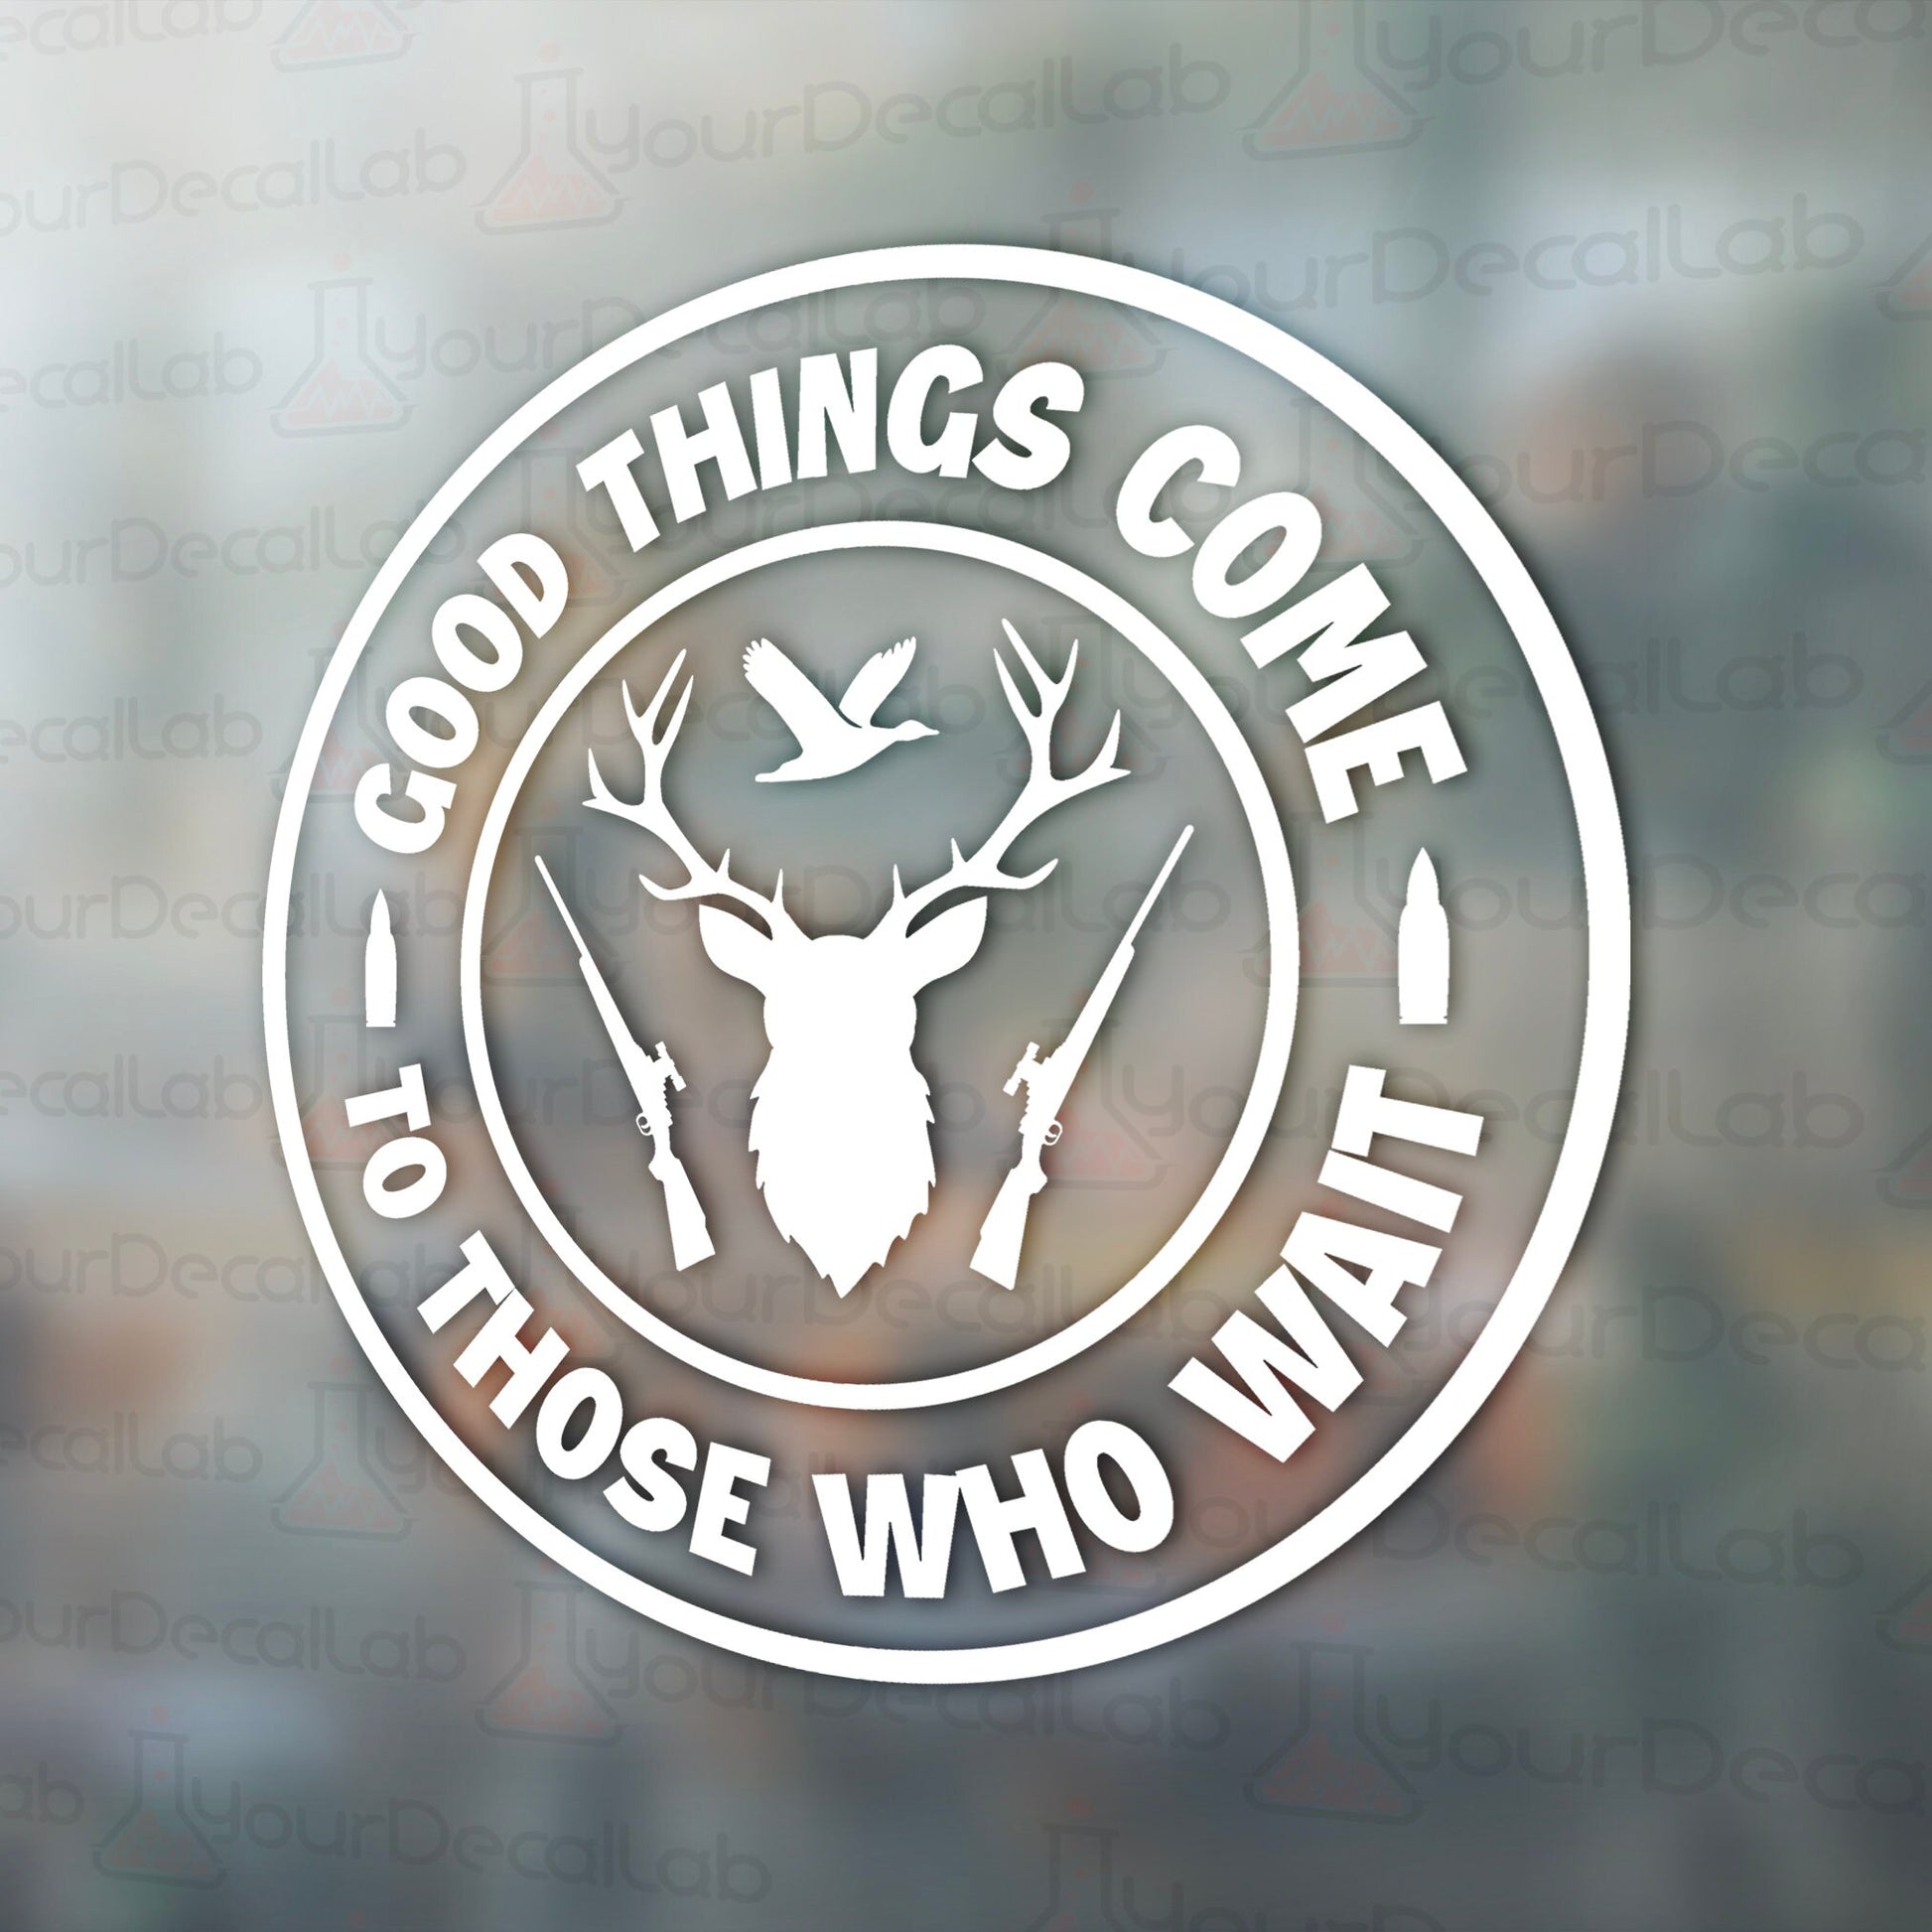 a sticker that says good things come to those who wait